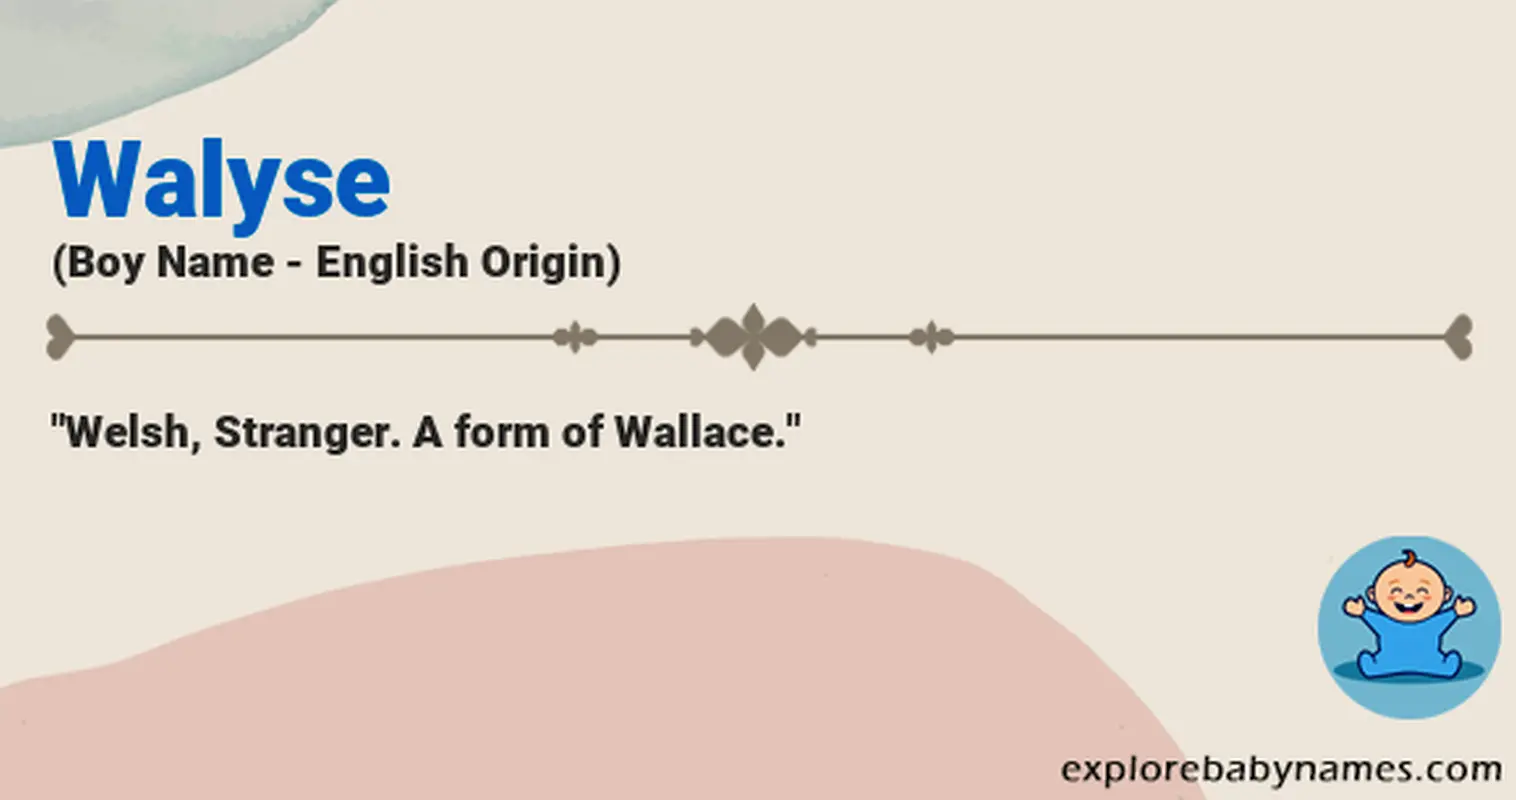 Meaning of Walyse